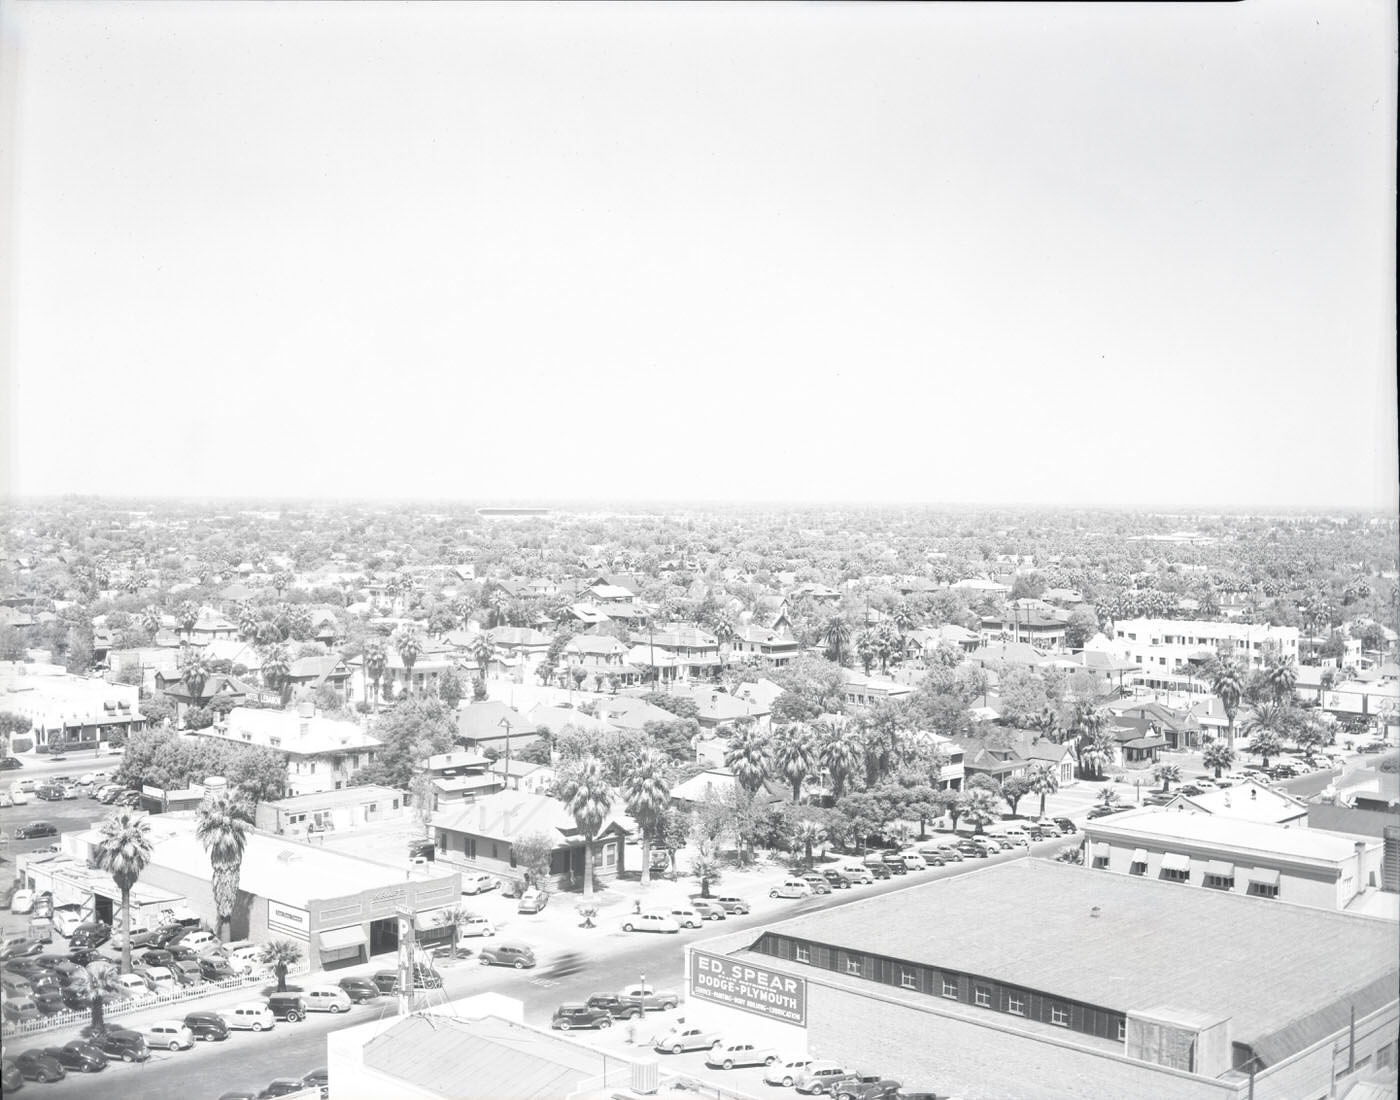 Cityscape of Phoenix, 1946. View looking south from the 300 block of N. 1st St. taken from a rooftop located at approximately the intersection of Central and Van Buren. Ed. Spear Dodge-Plymouth is visible.